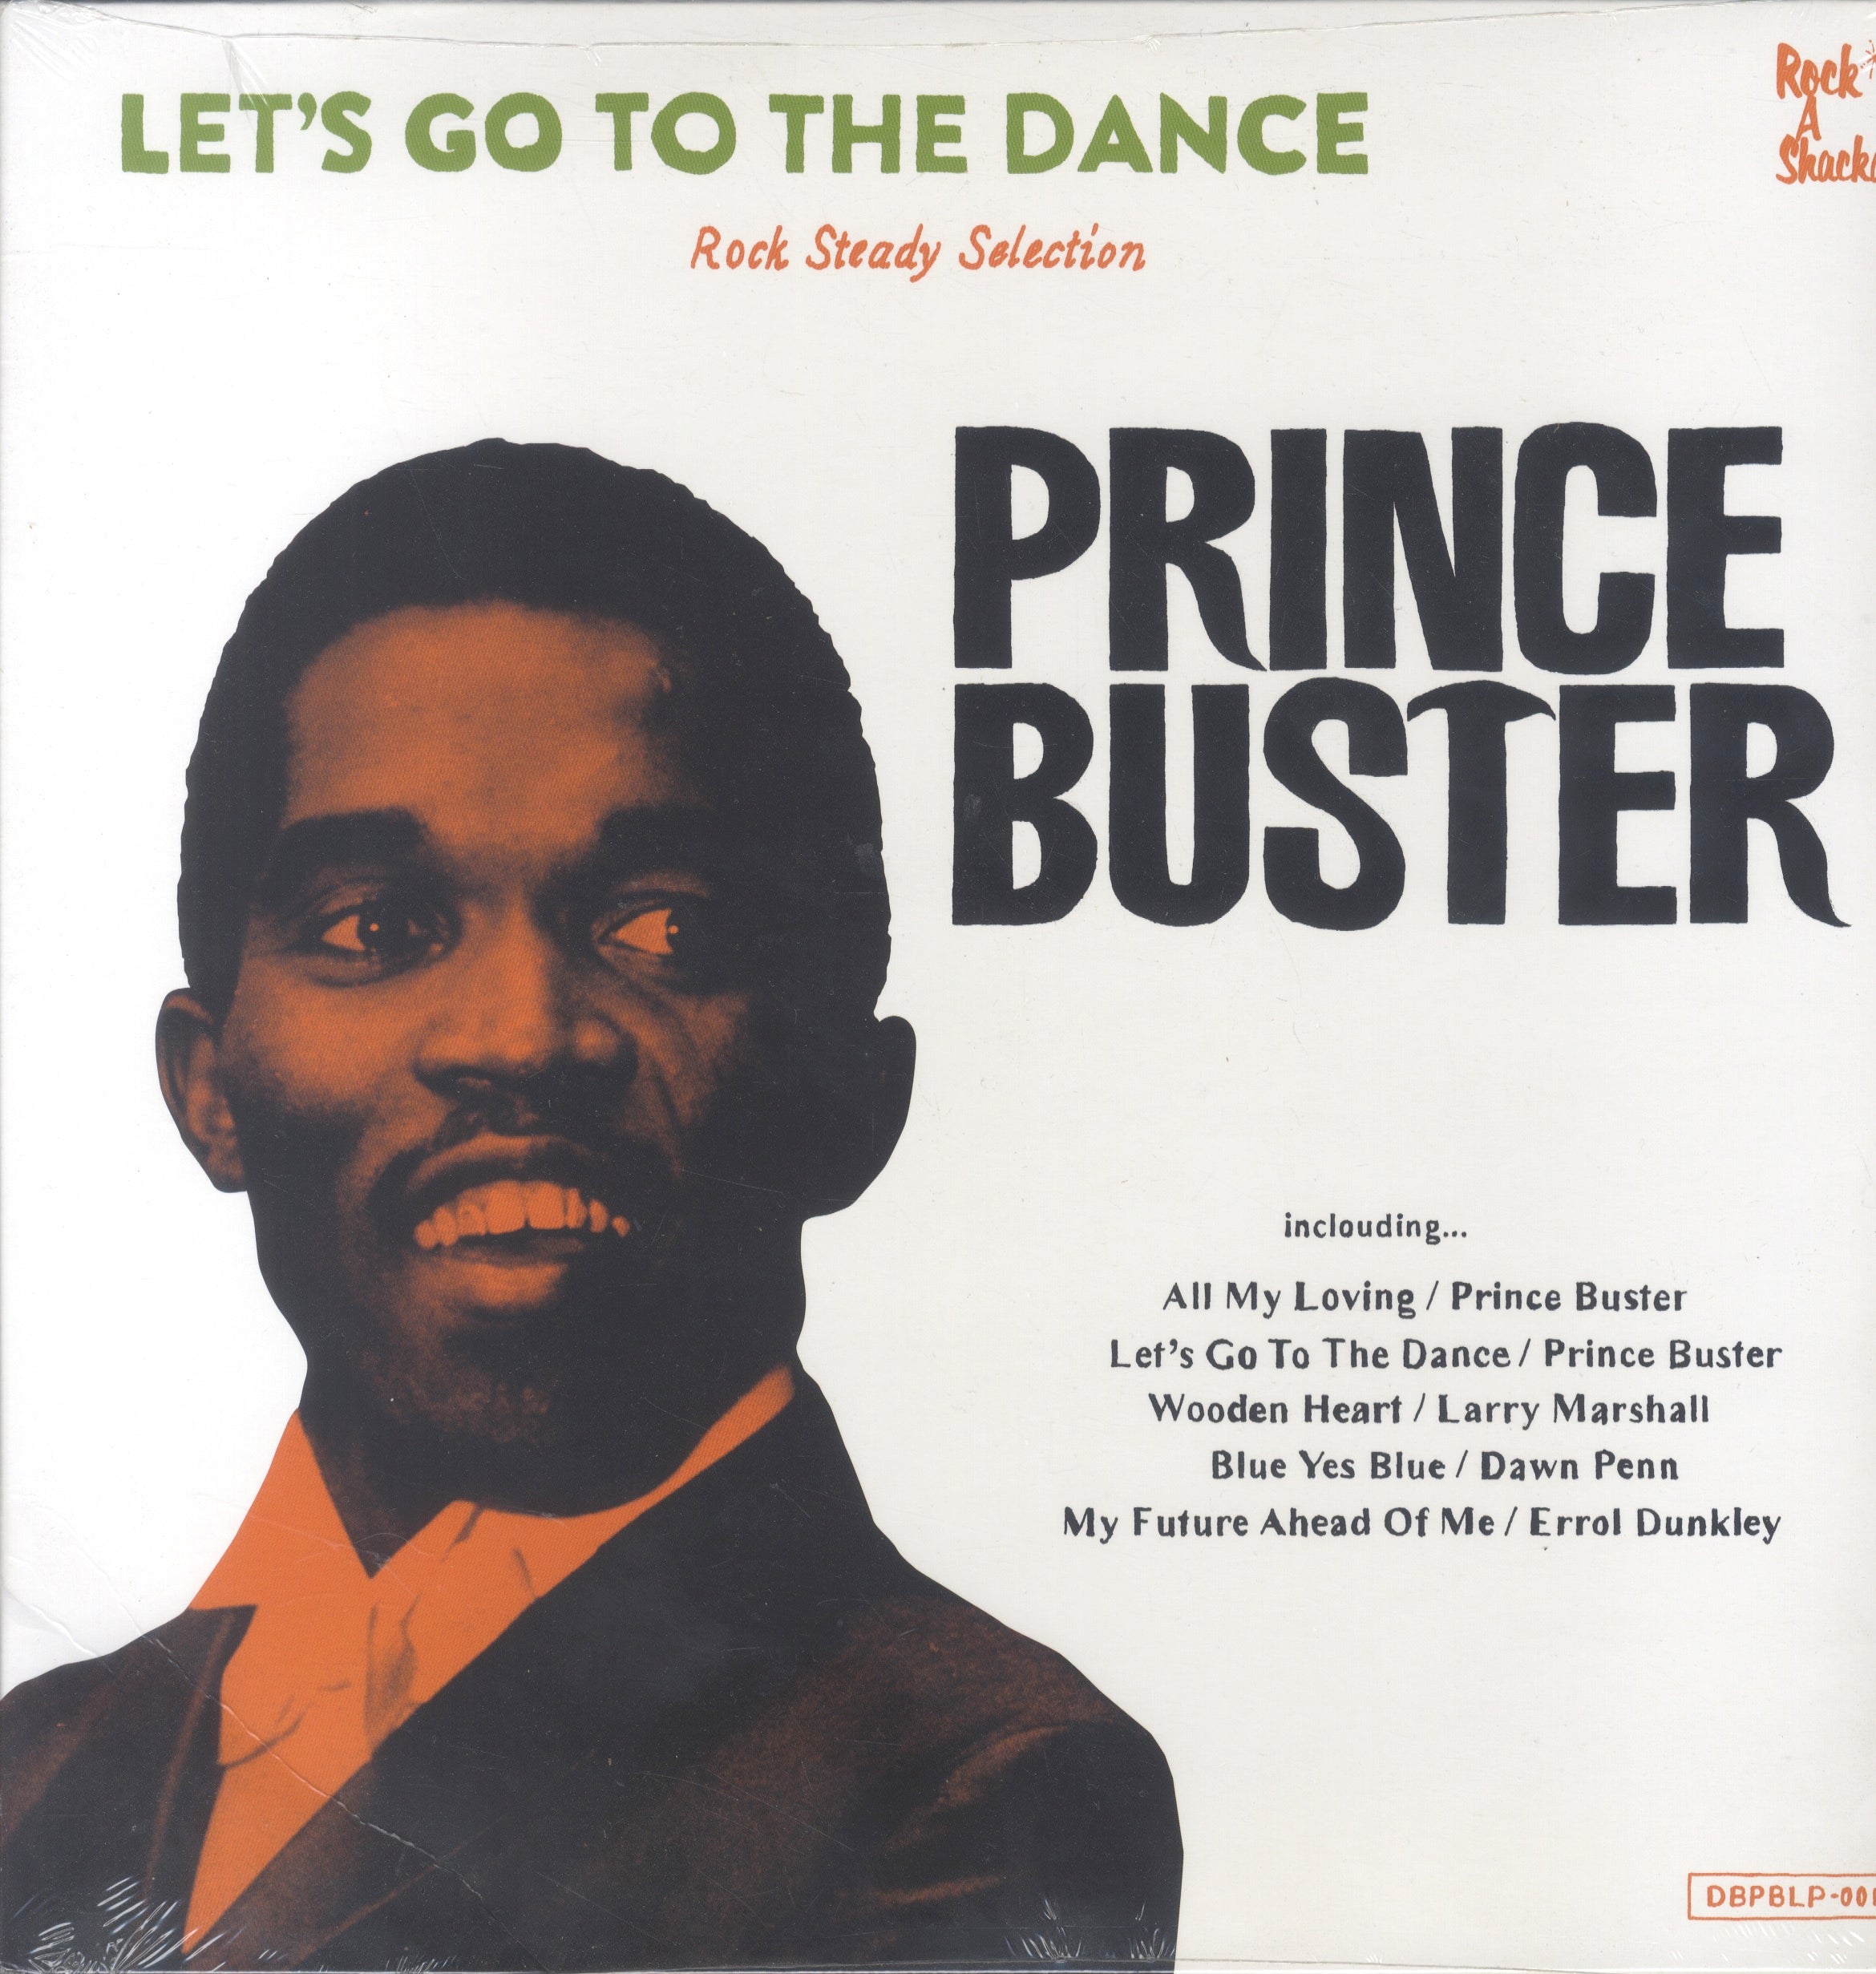 PRINCE BUSTER [Let's Go To The Dance]